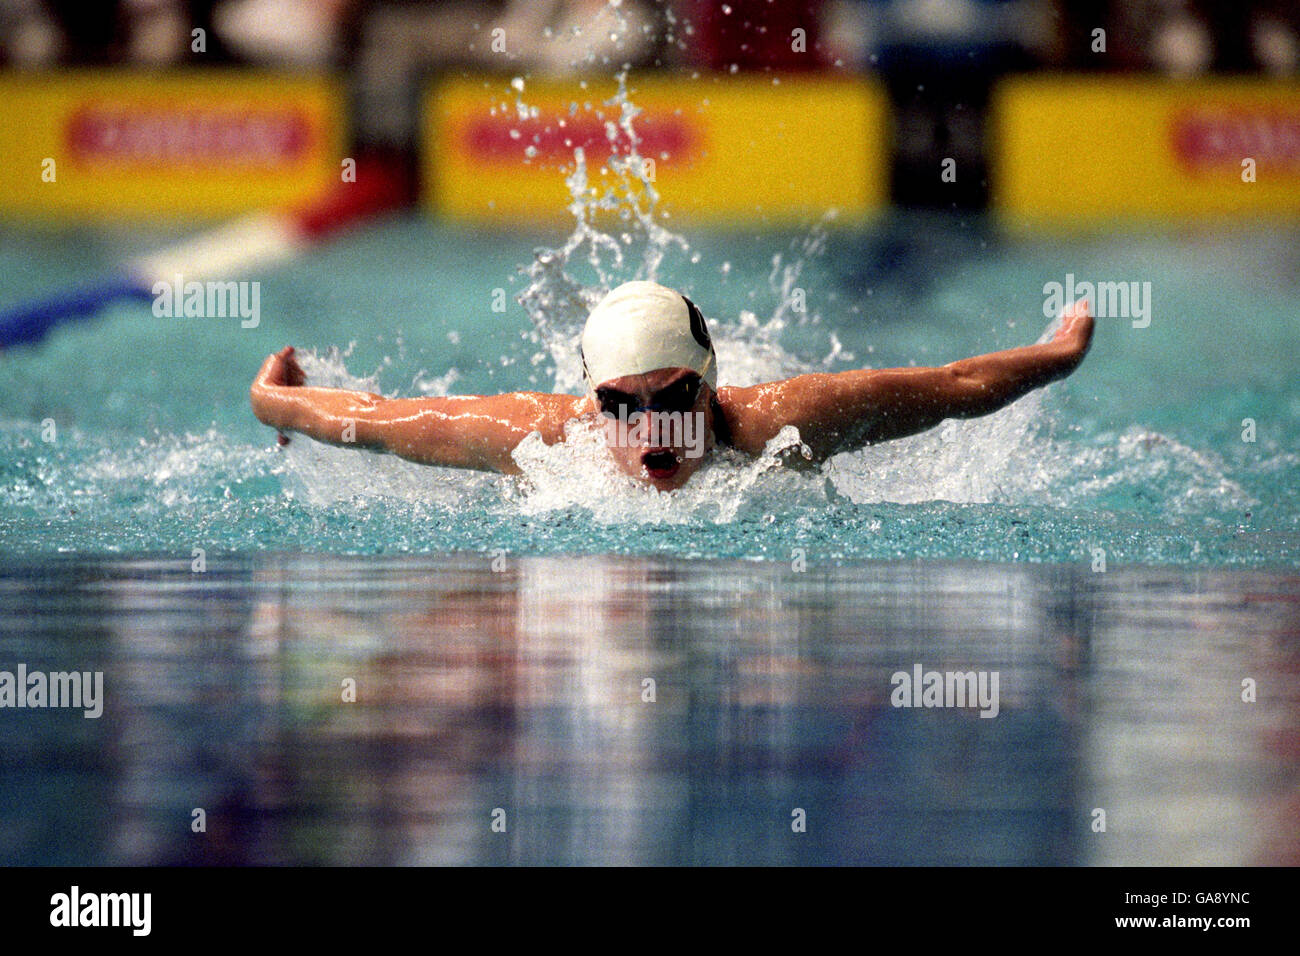 Swimming - Olympic National Swimming Trials - Ponds Forge. Georgina Lee in action Stock Photo